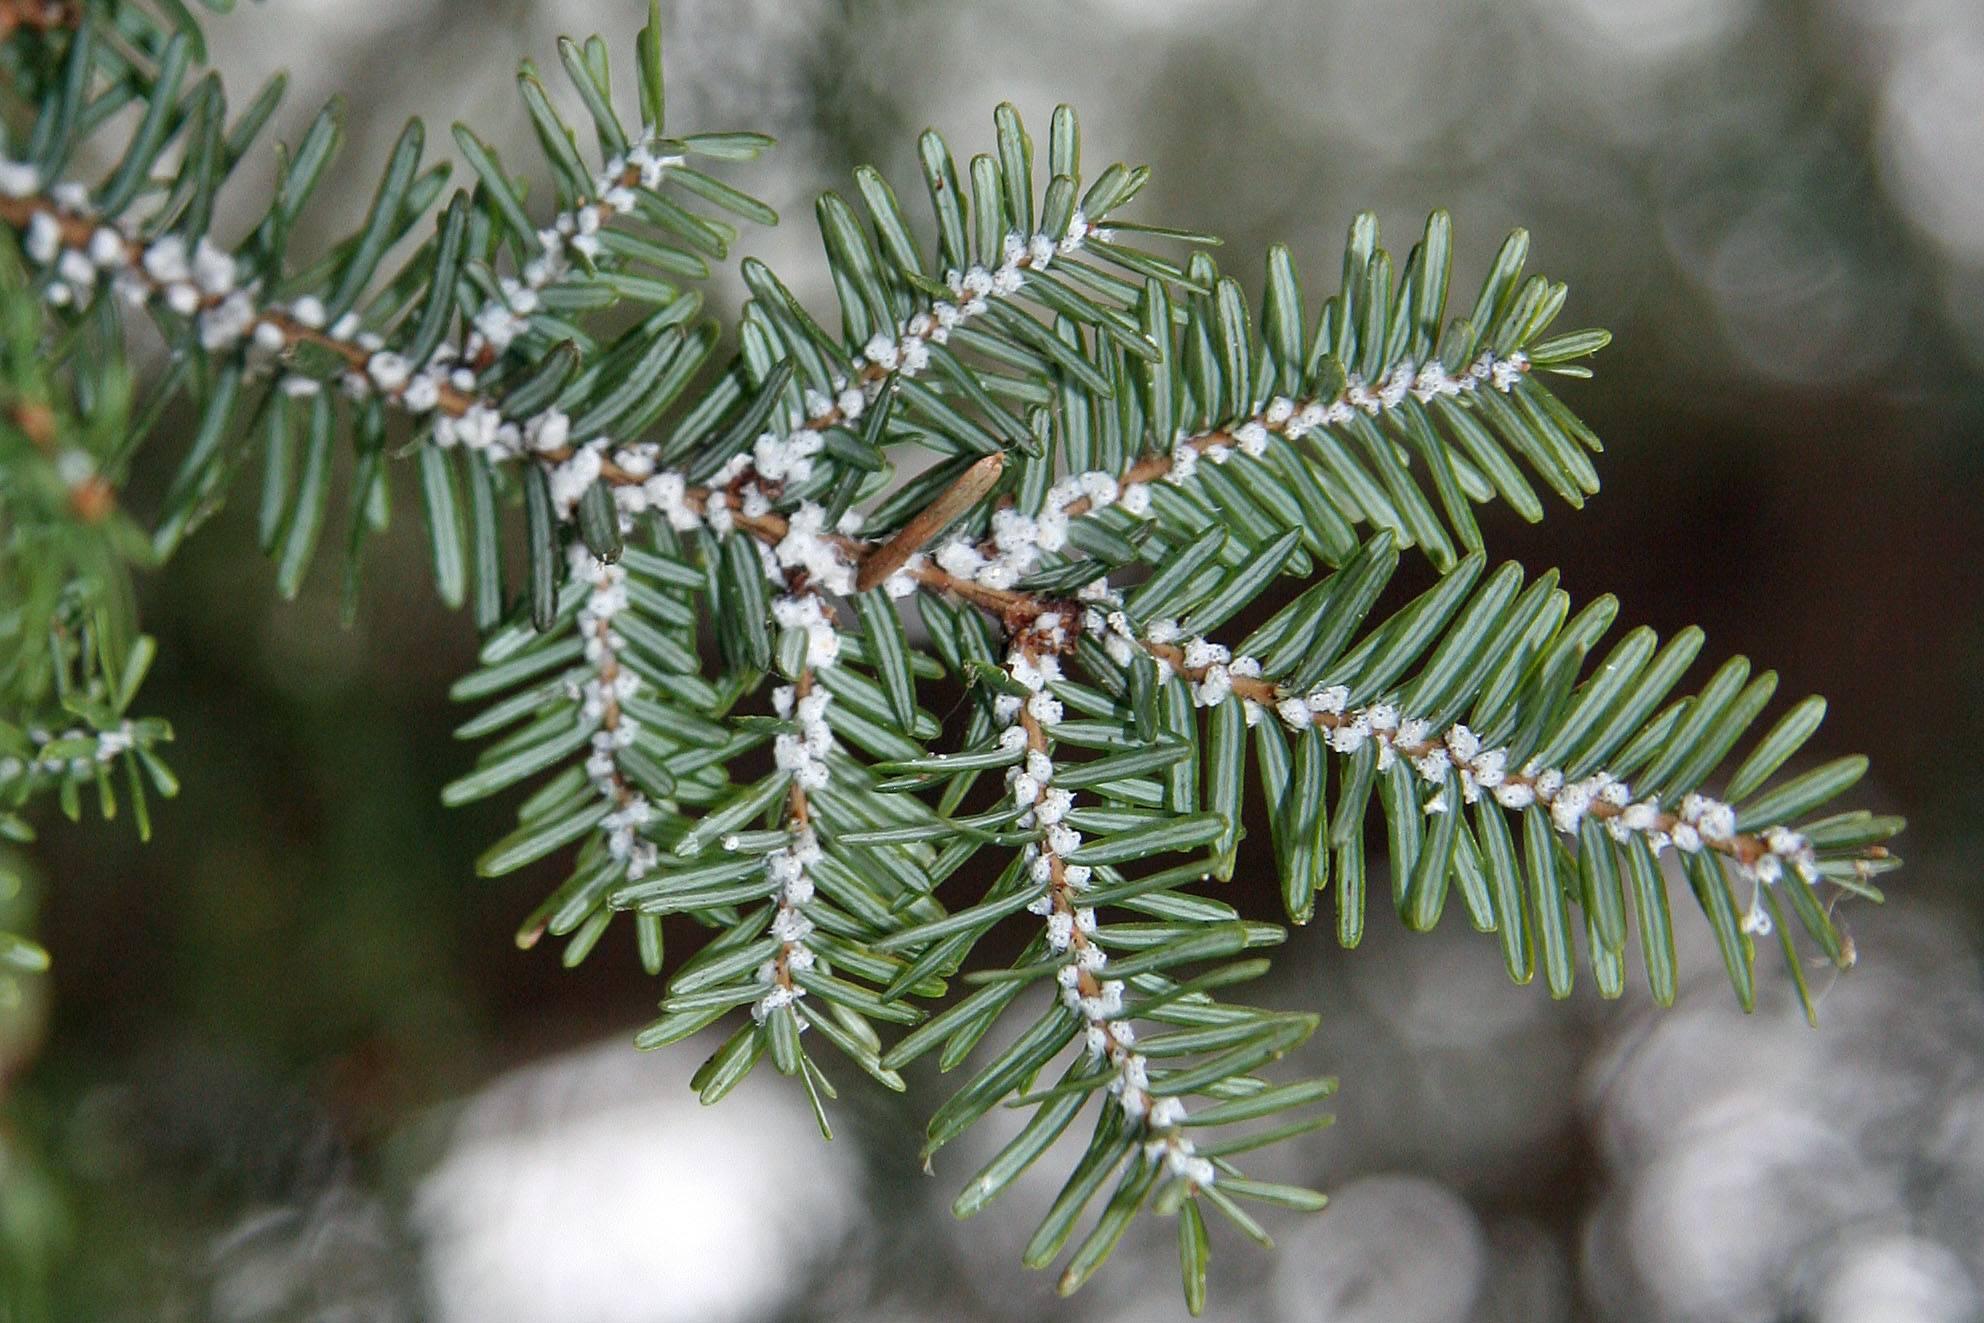 close up of pine tree afflicted with Hemlock Woolly Adelgids